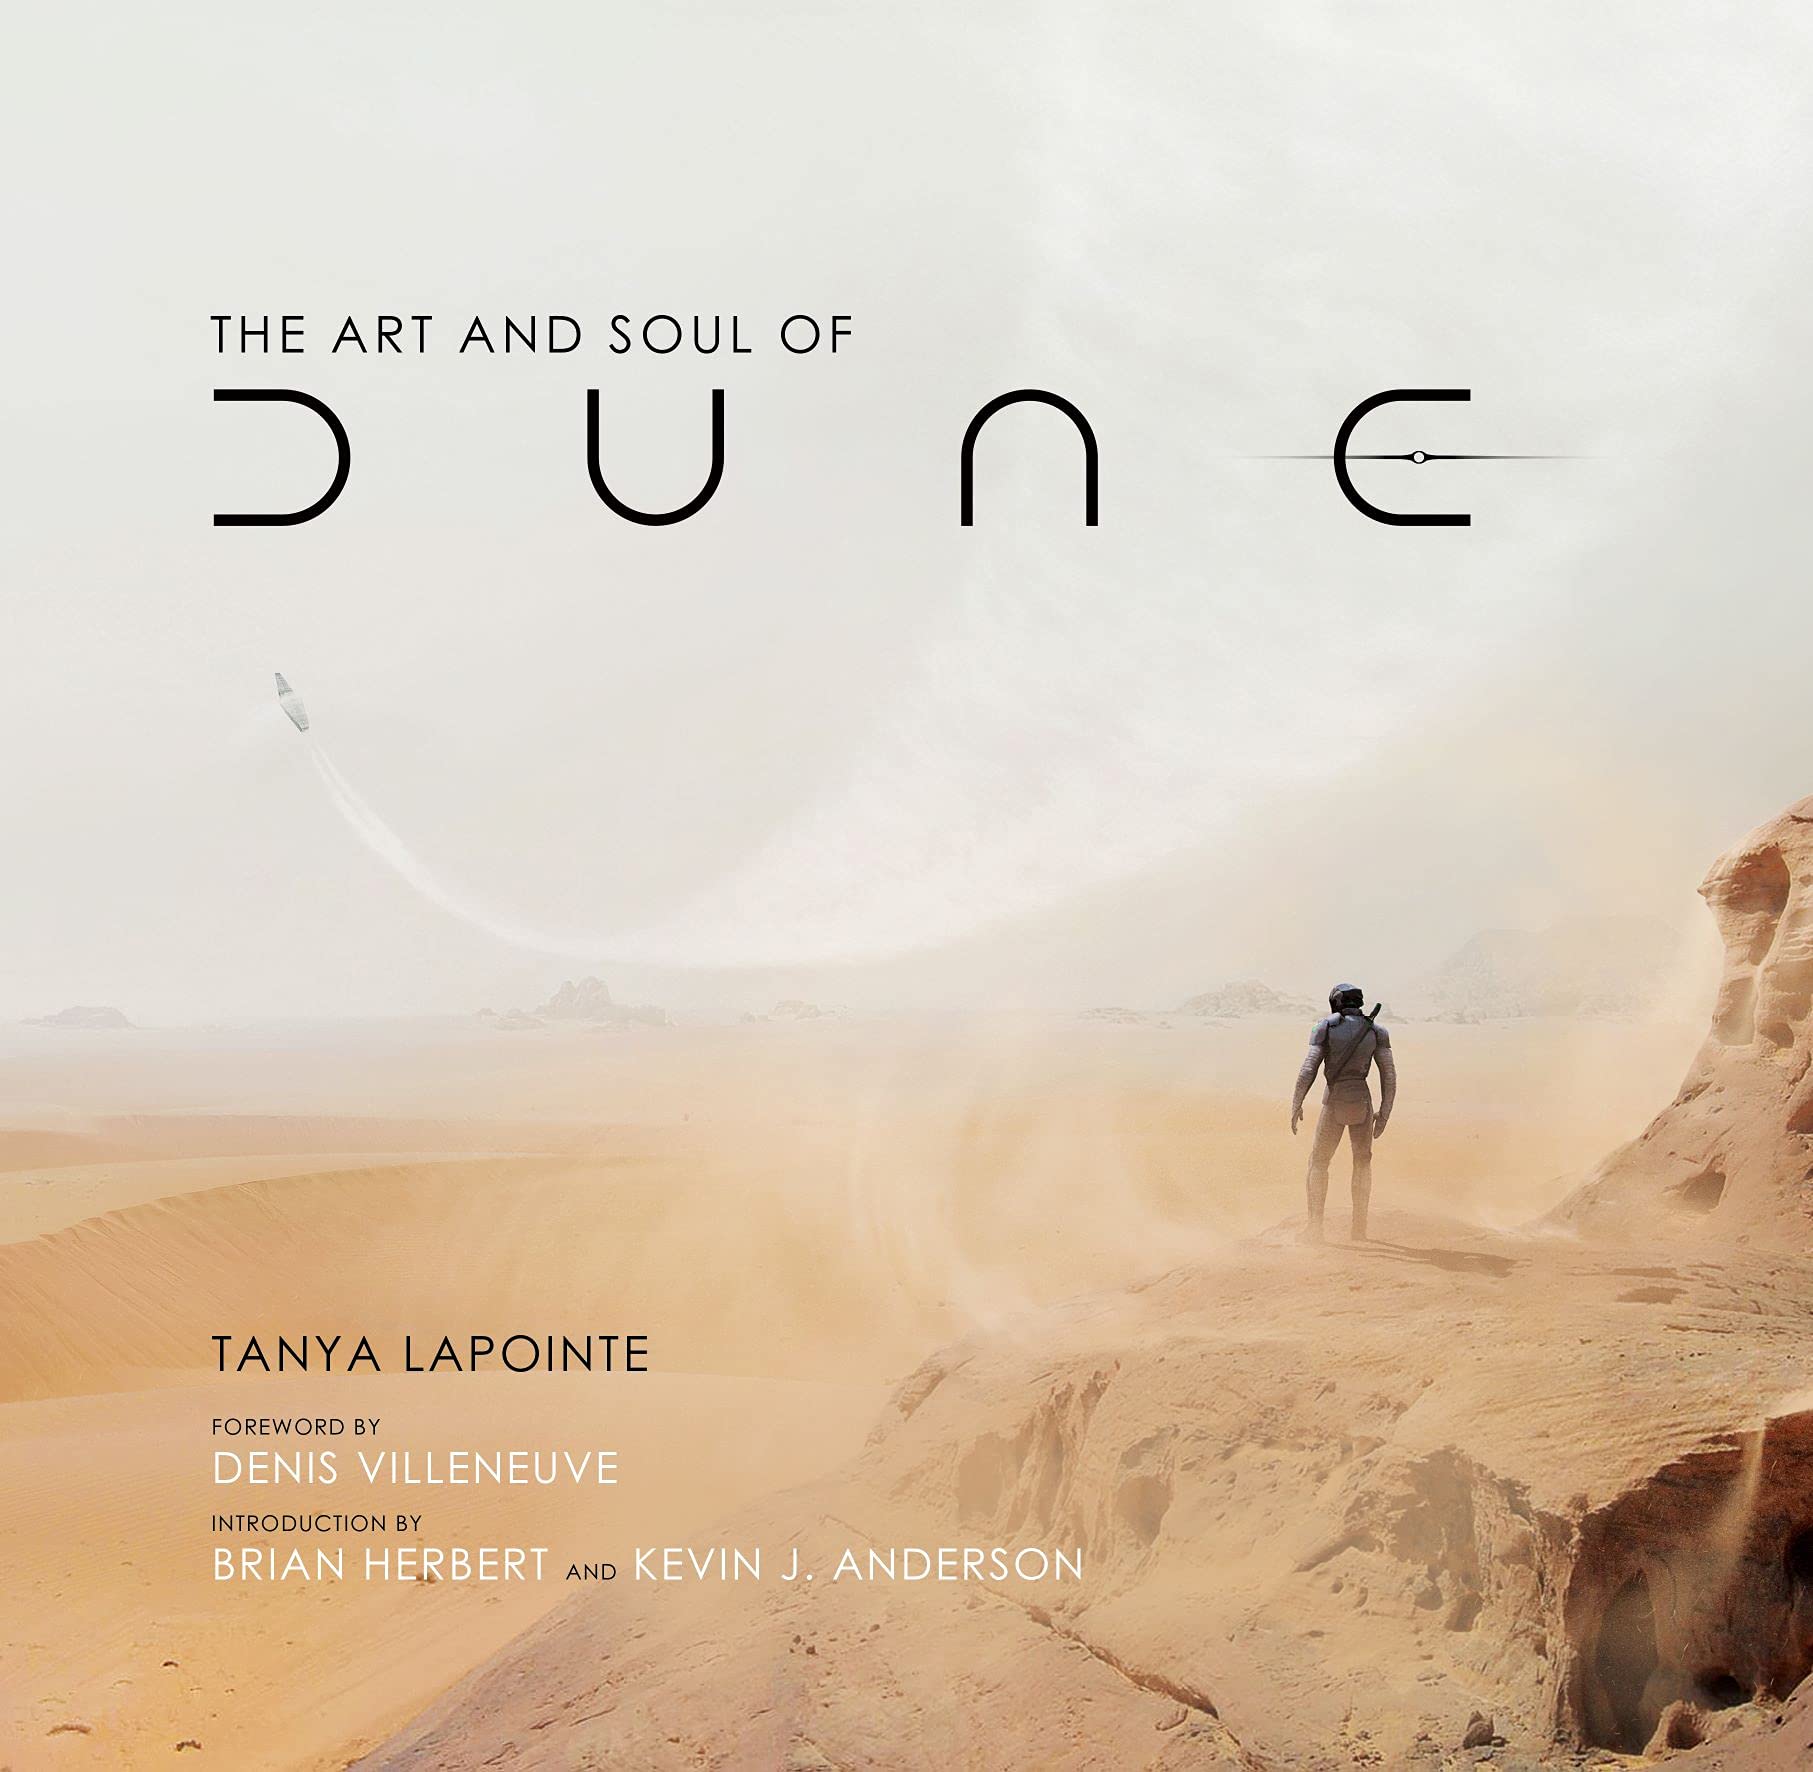 The Art and Soul of Dune (Hardcover)